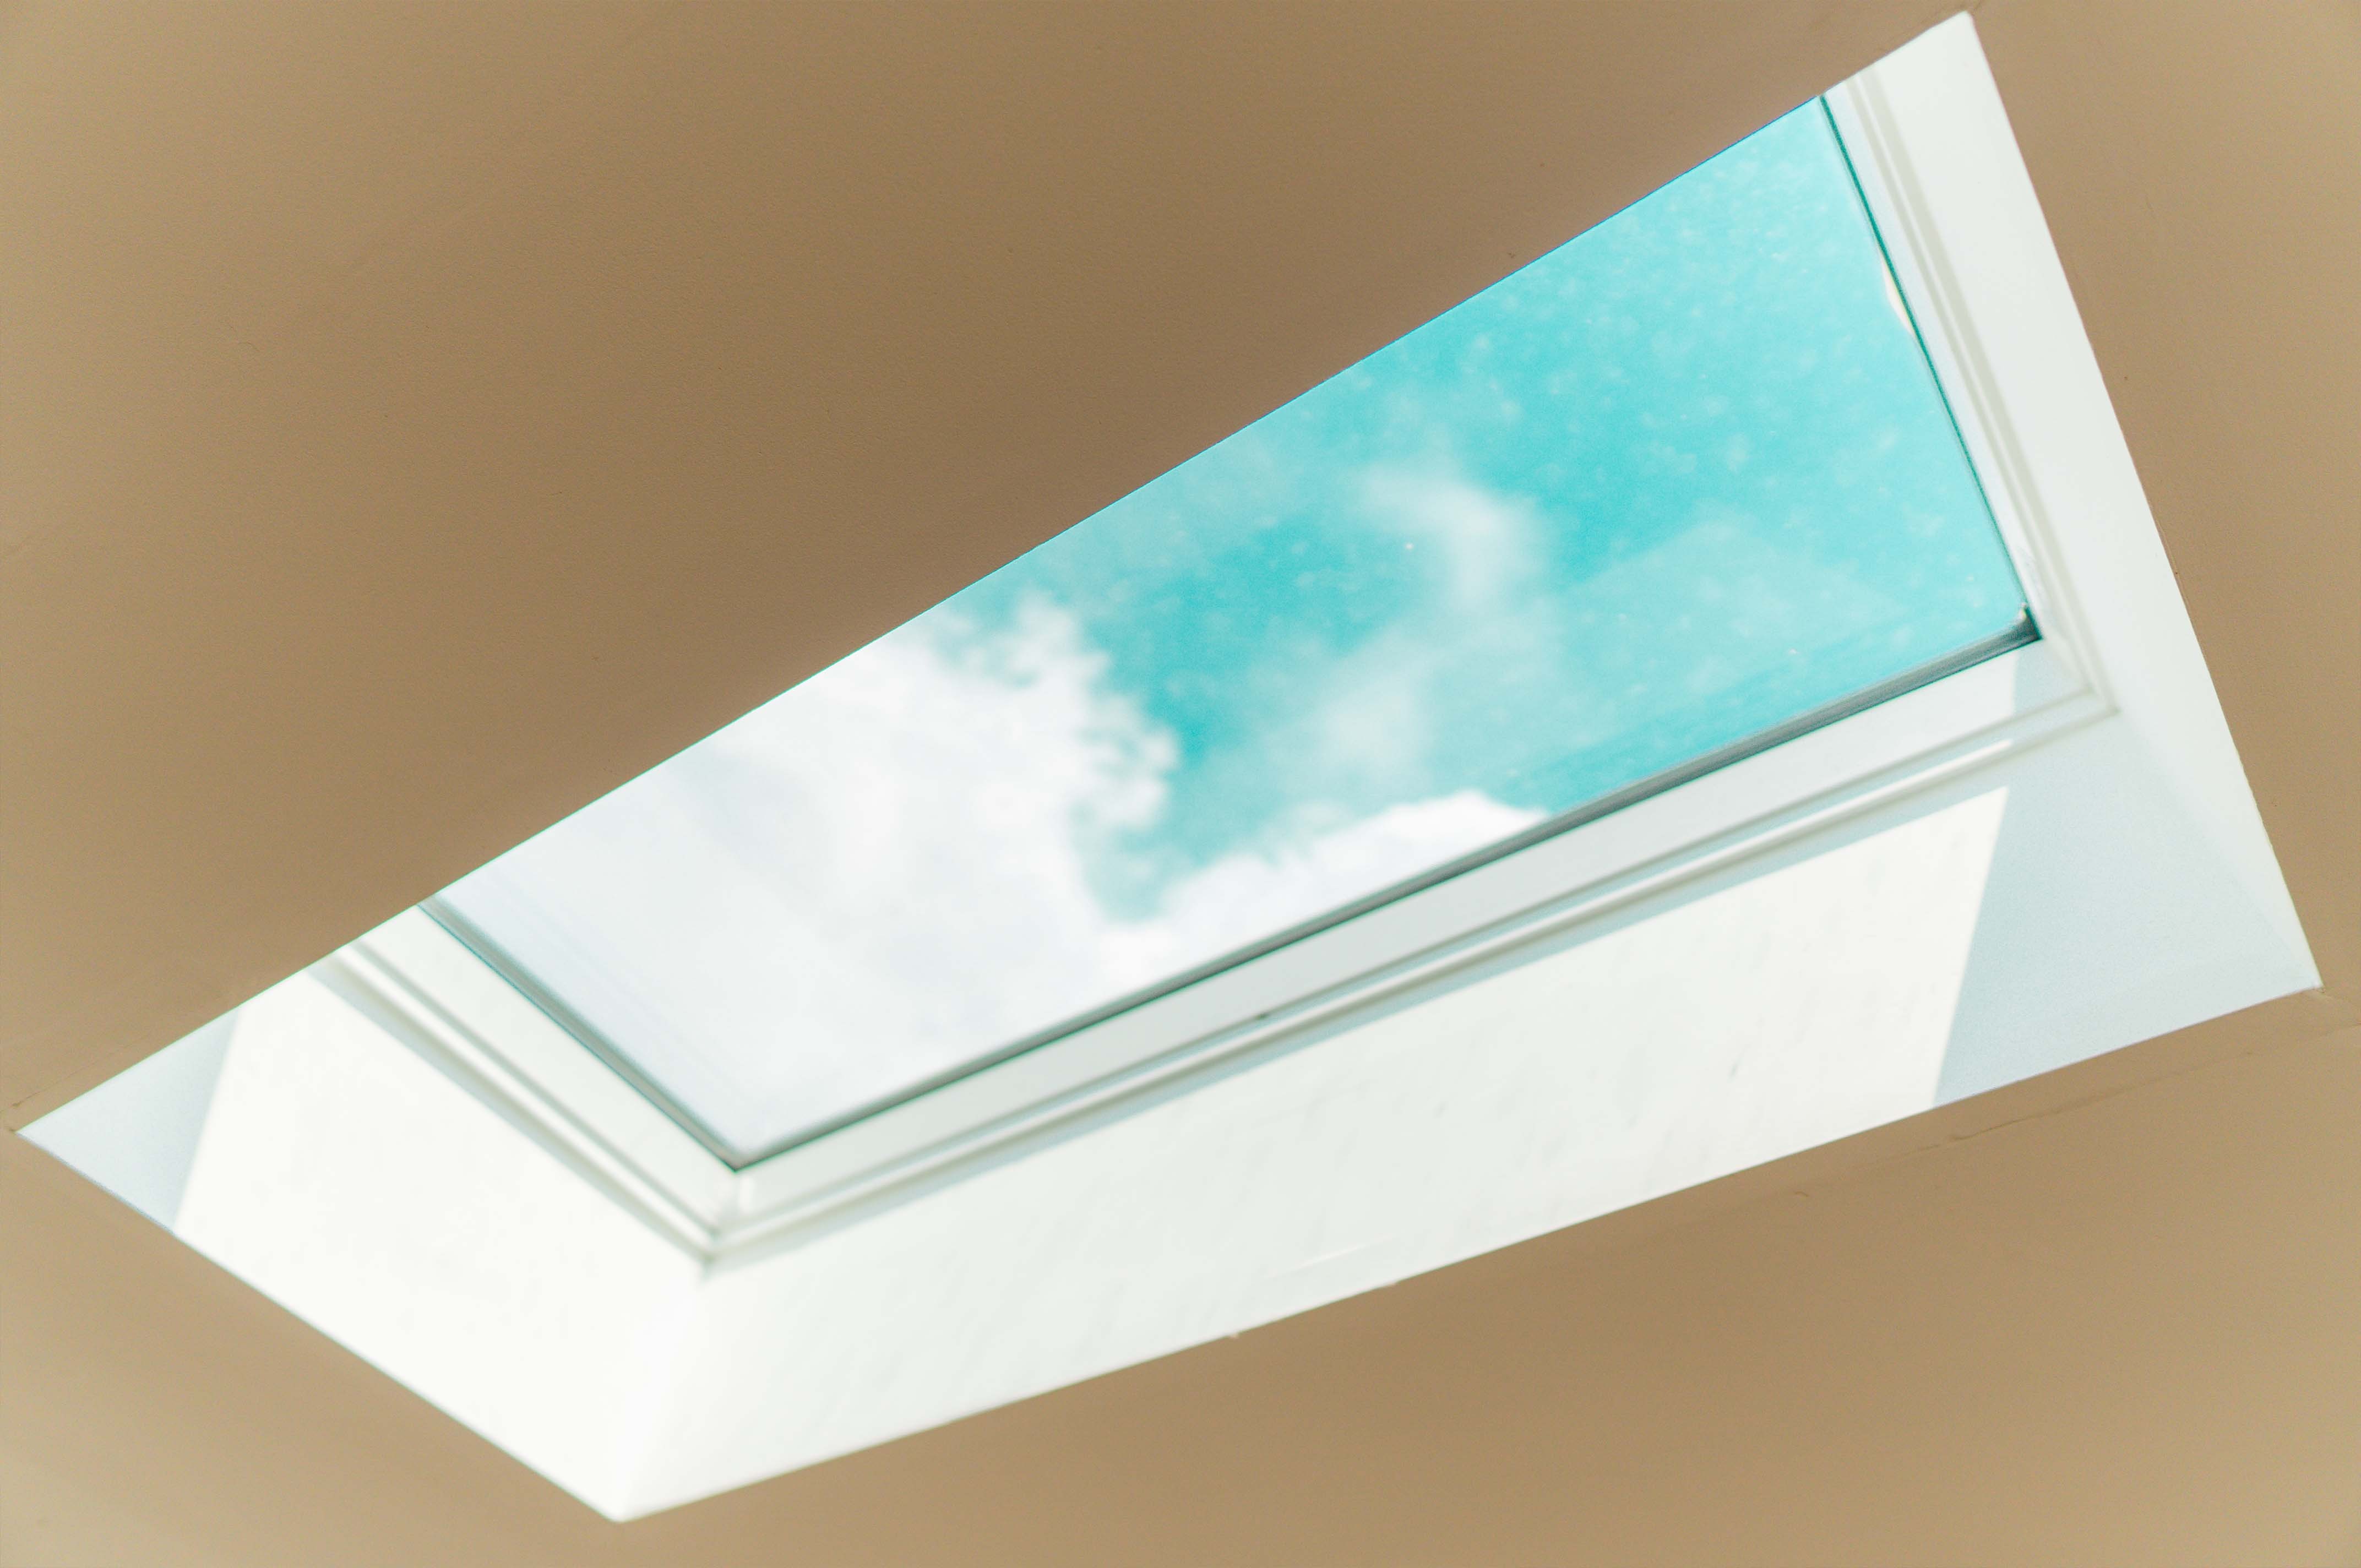 What are the strengths of skylights?